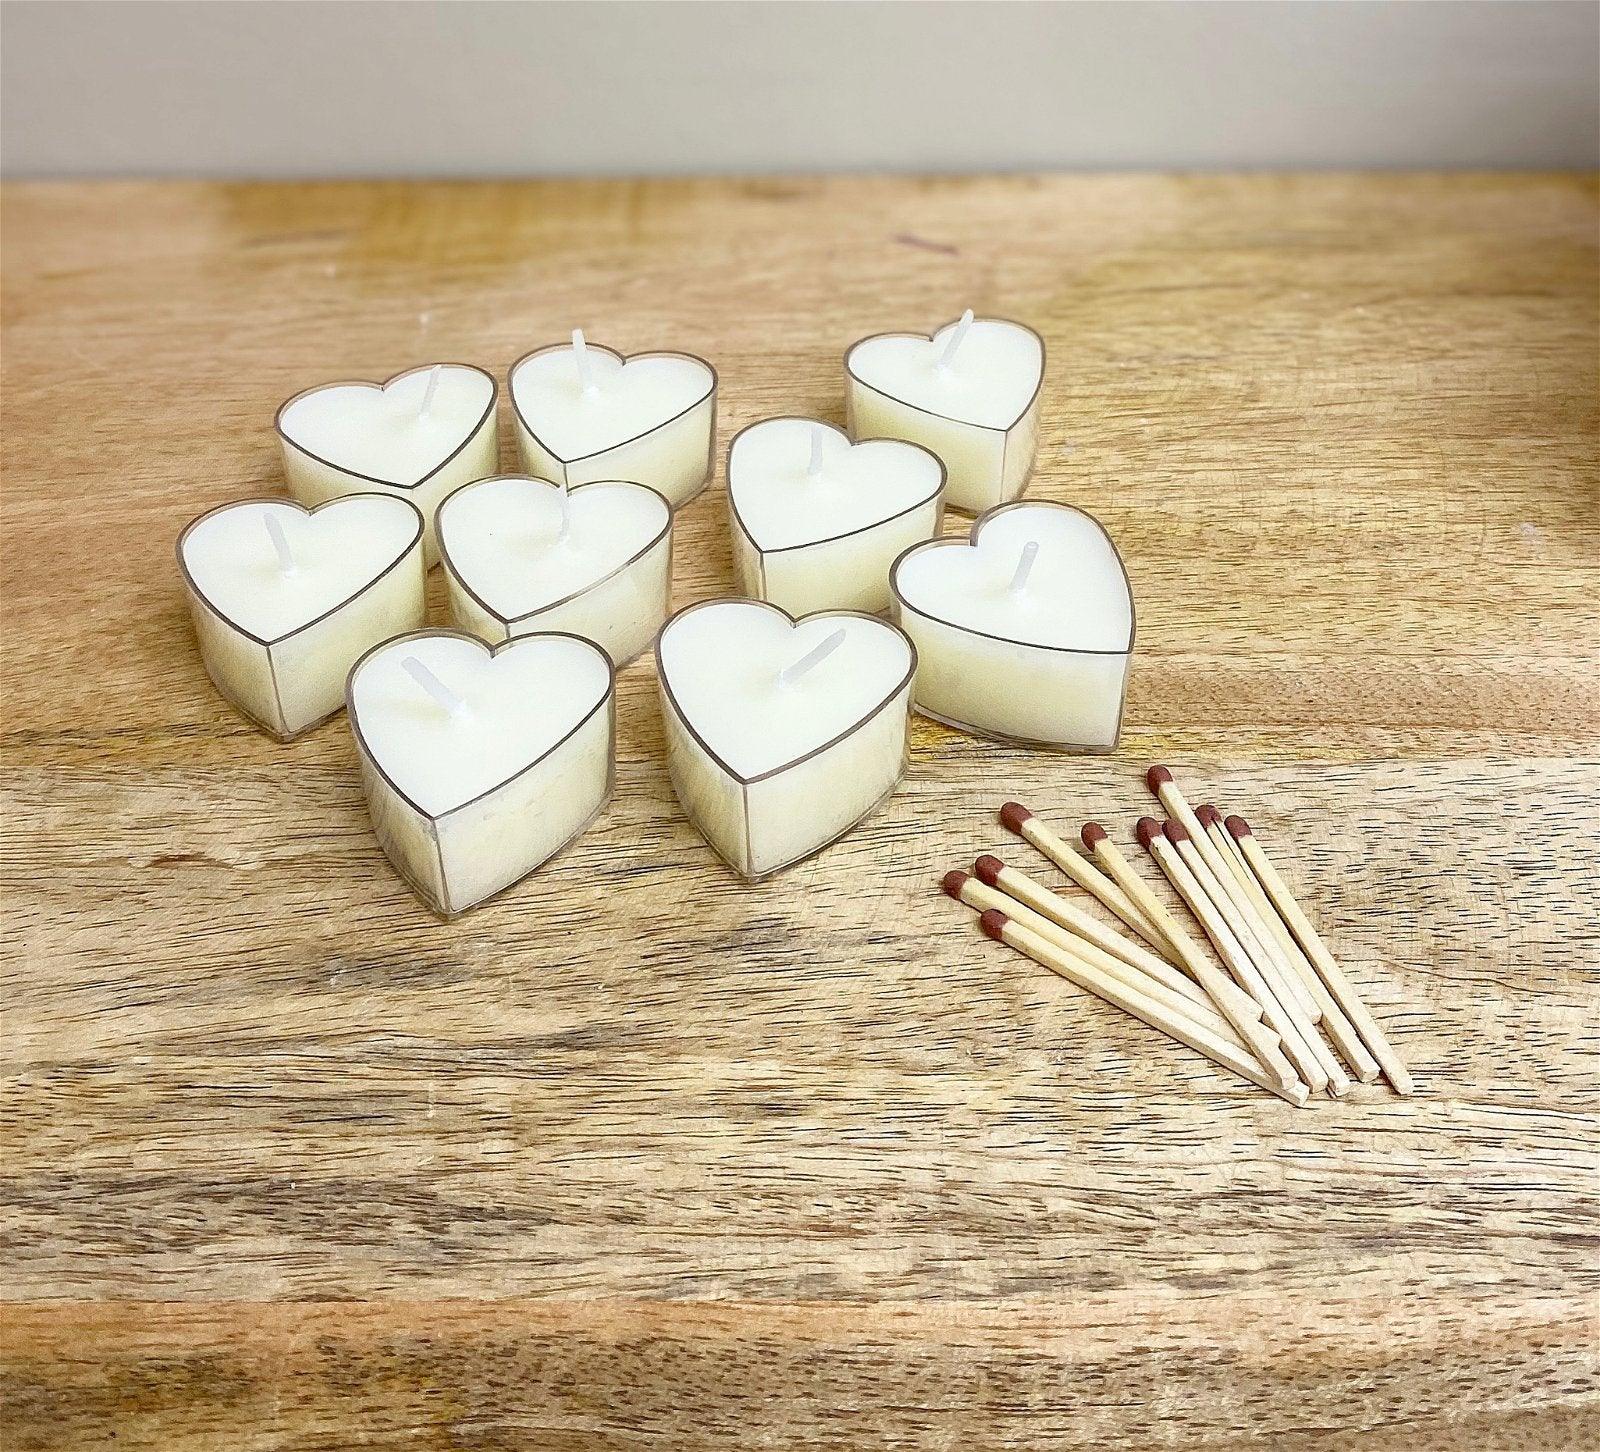 View Pack of Nine Small Heart Shaped Tea Light Candles information